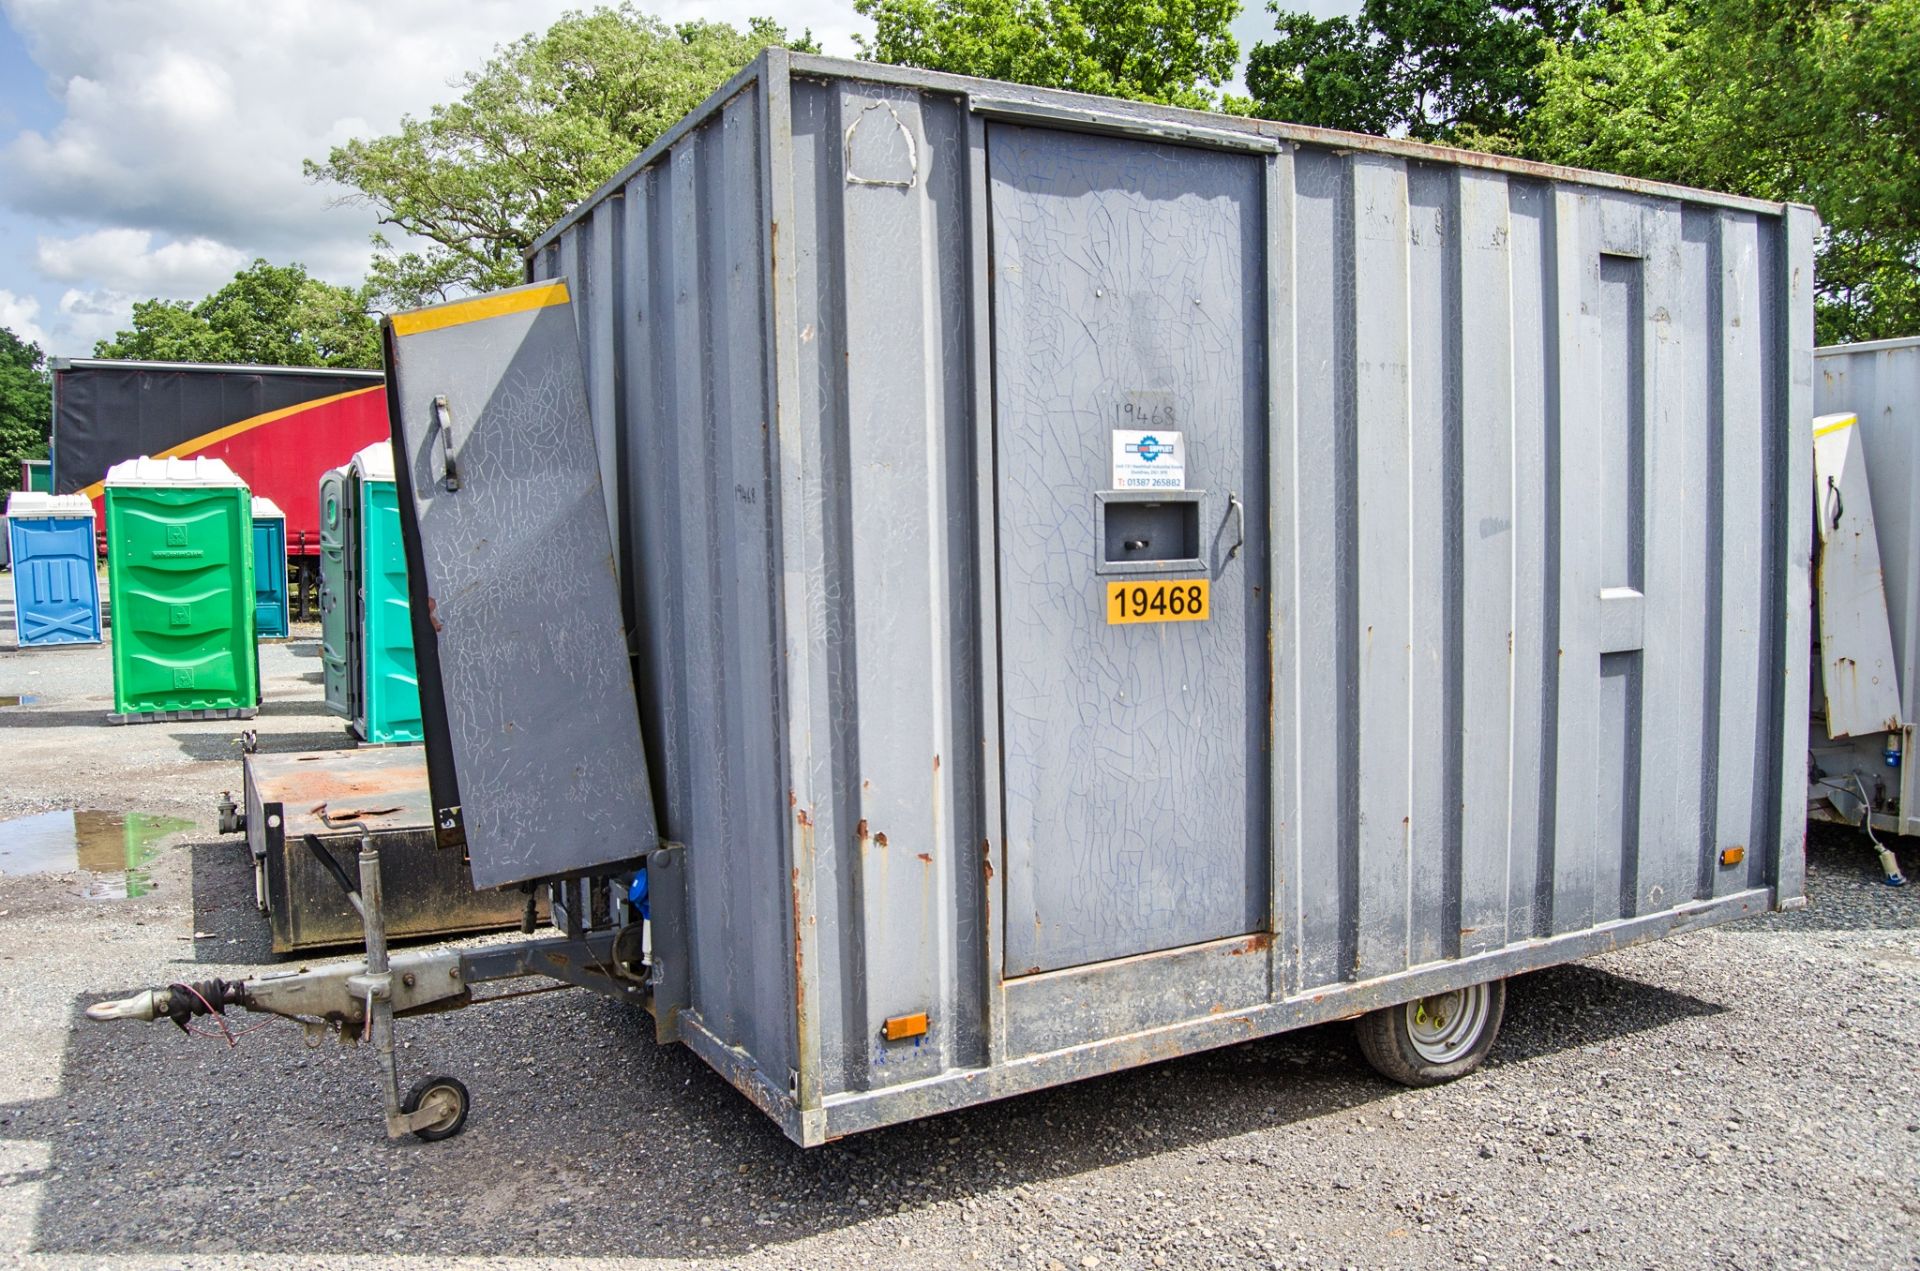 12ft x 8ft steel anti-vandal mobile welfare unit Comprising of: canteen area, toilet & generator